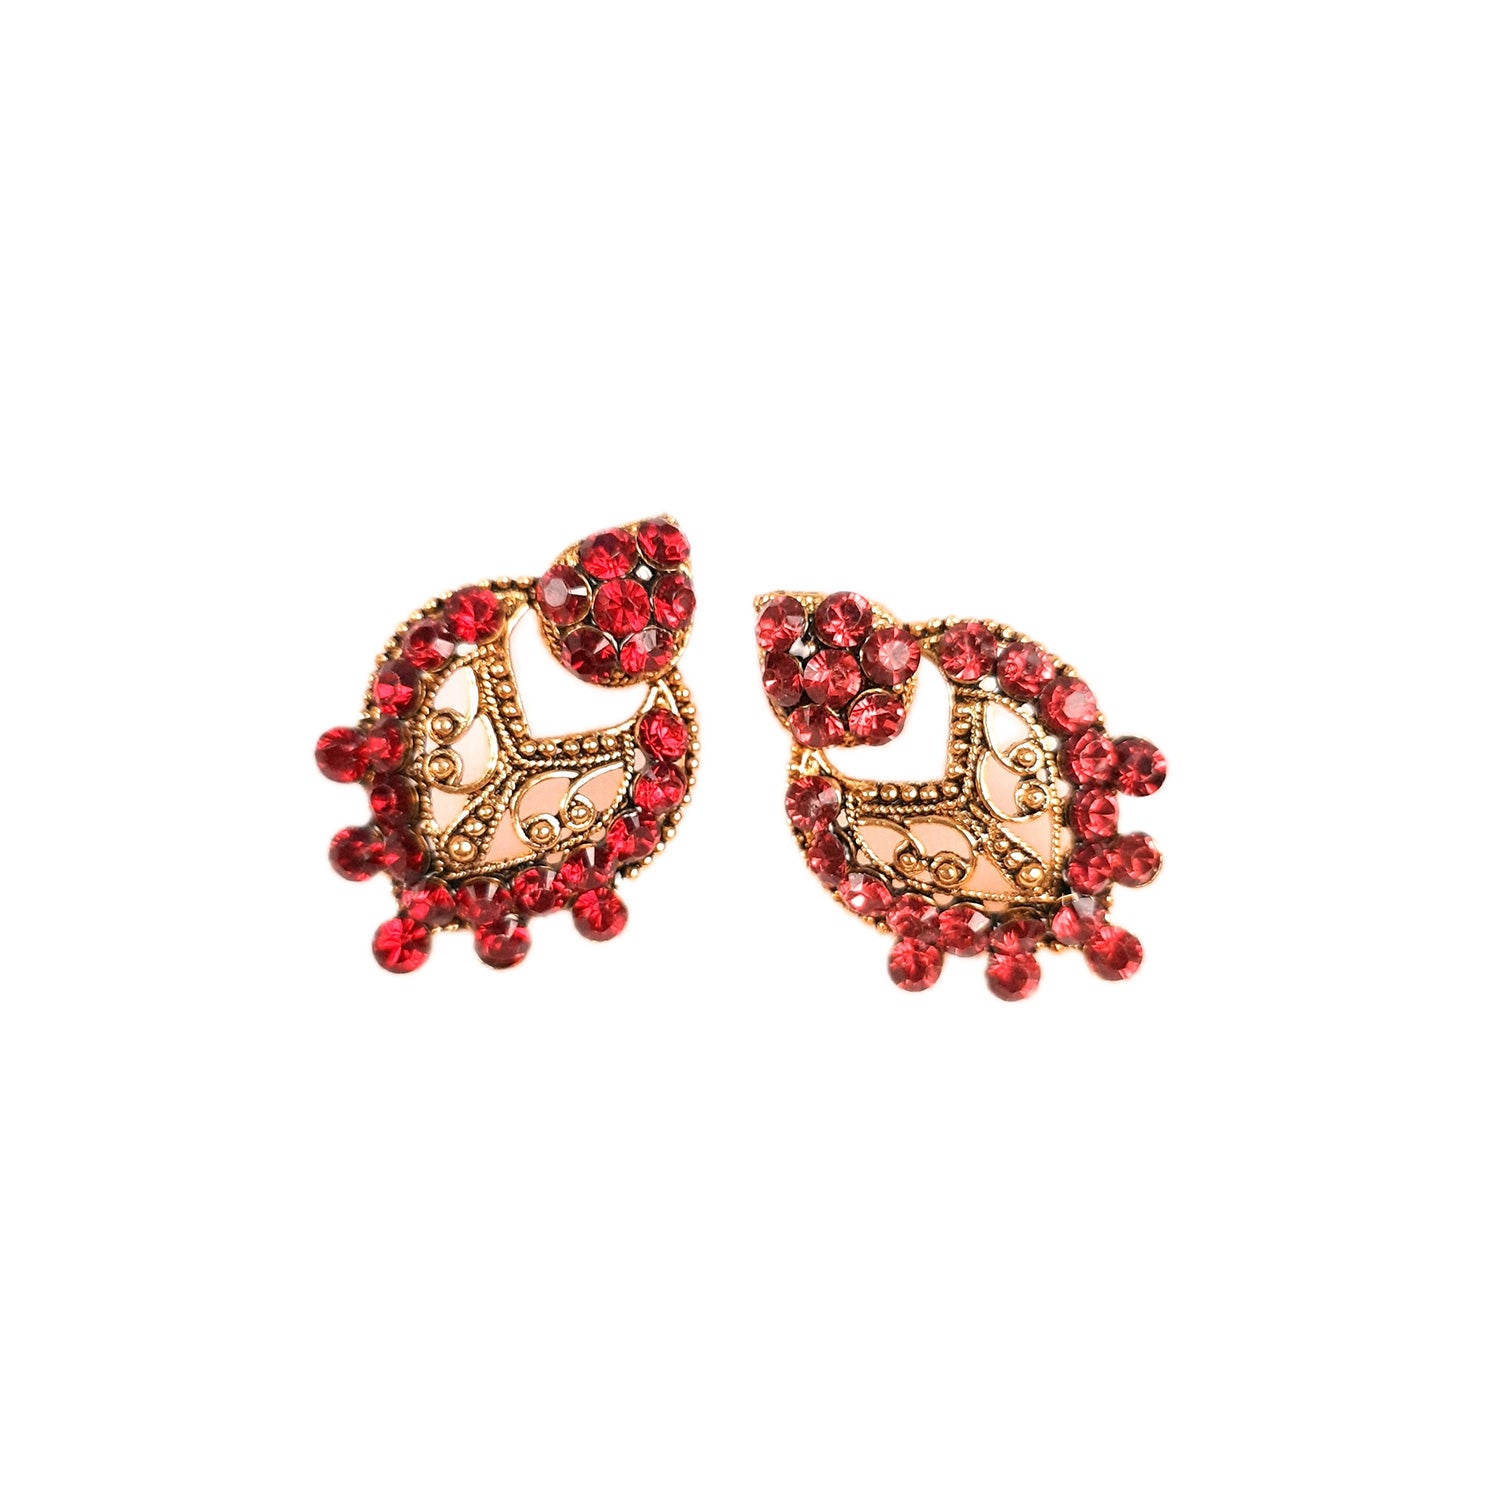 Stone Earrings Stud for Women & Girls | Latest Stylish Fashion Jewellery | Gifts for Her, Friendship Day, Valentine's Day Gift -Apkamart